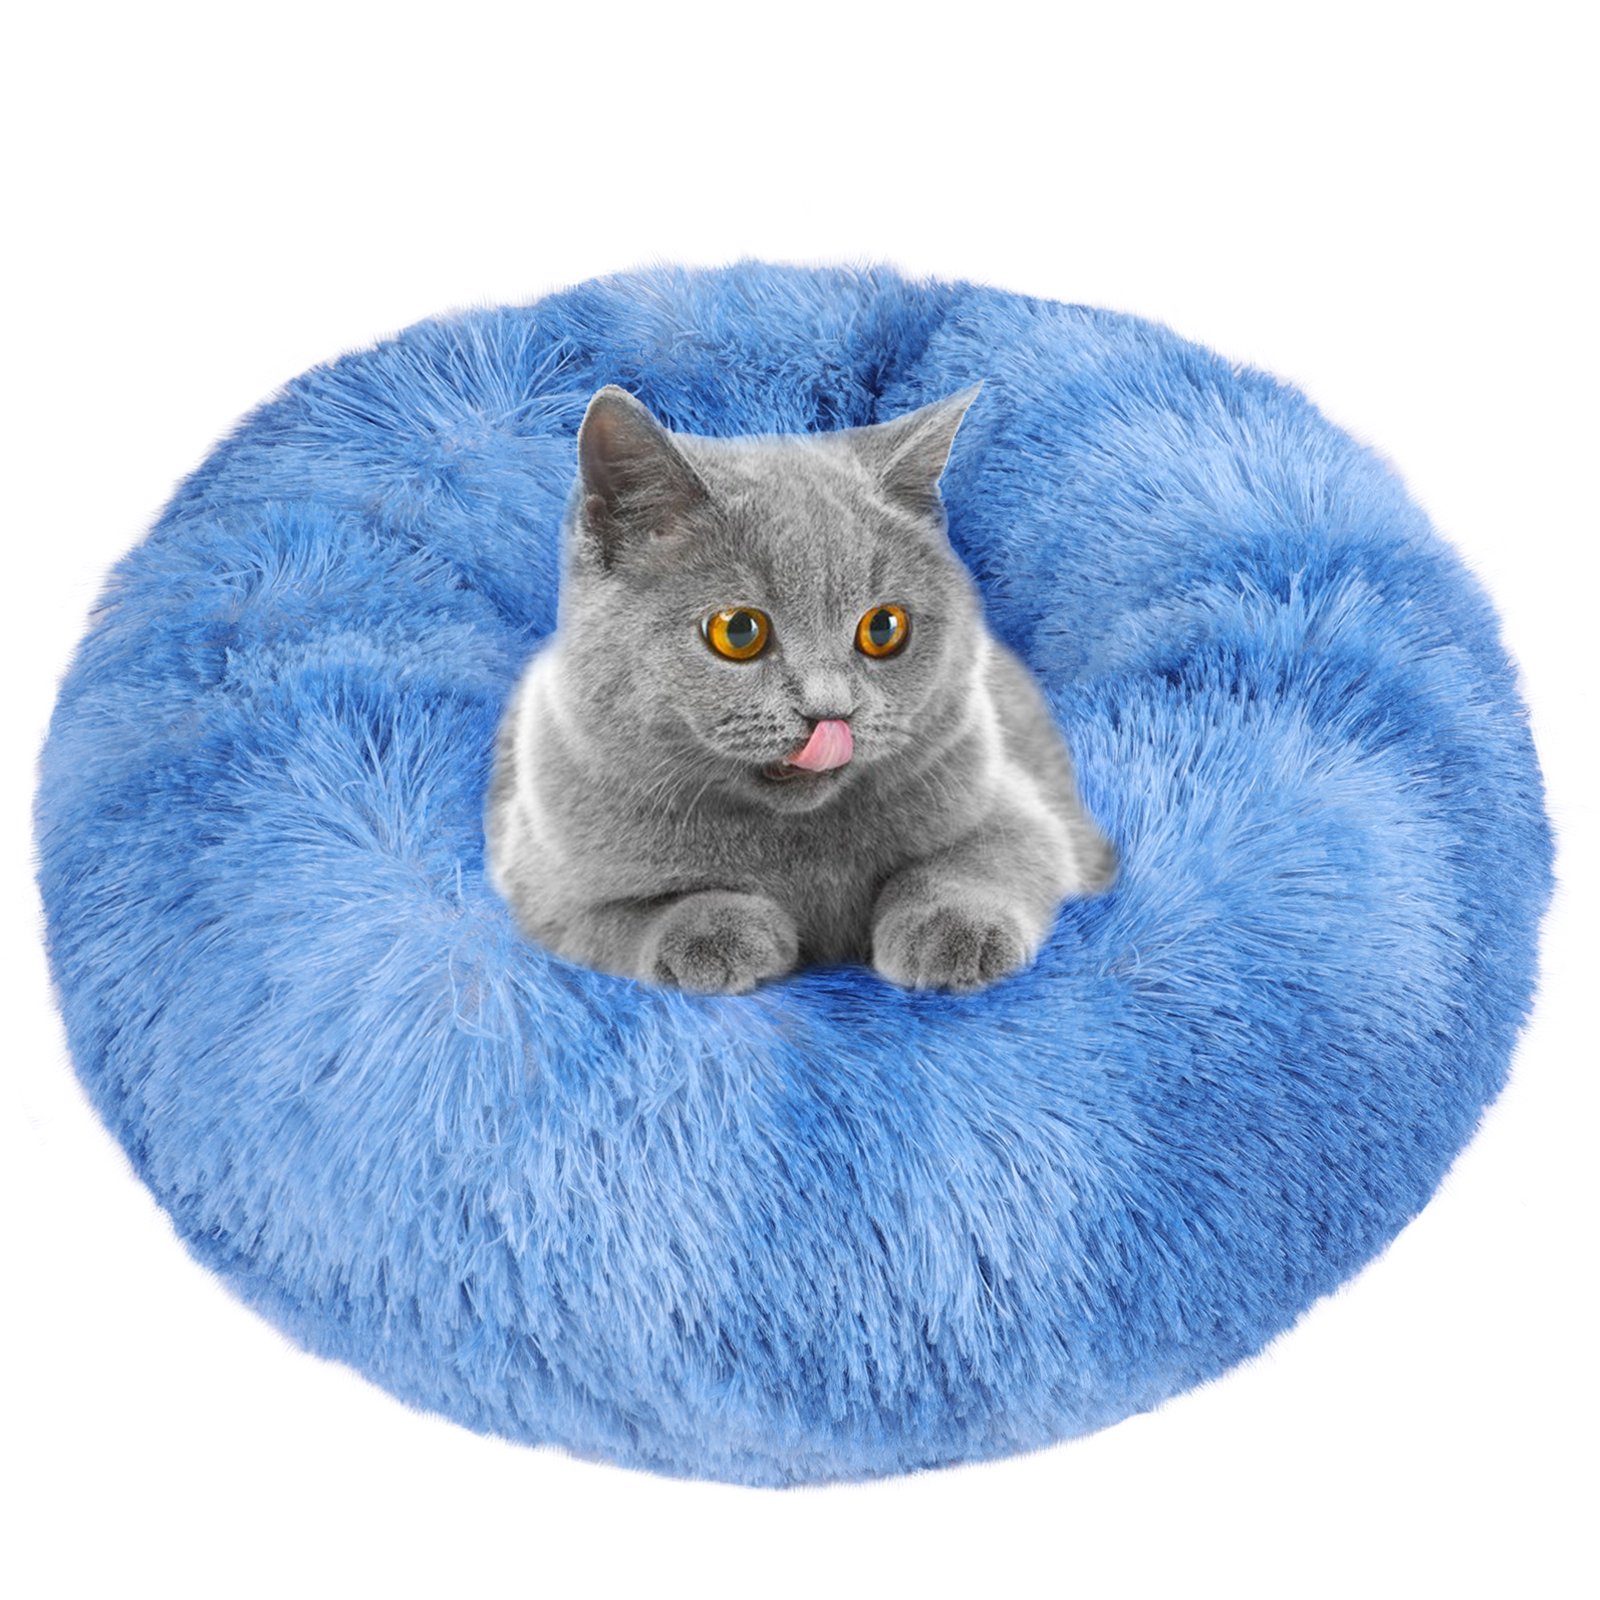 Round Plush Pet Bed for Dogs & Cats, Fluffy Soft Warm Calming Bed Sleeping Kennel Nest